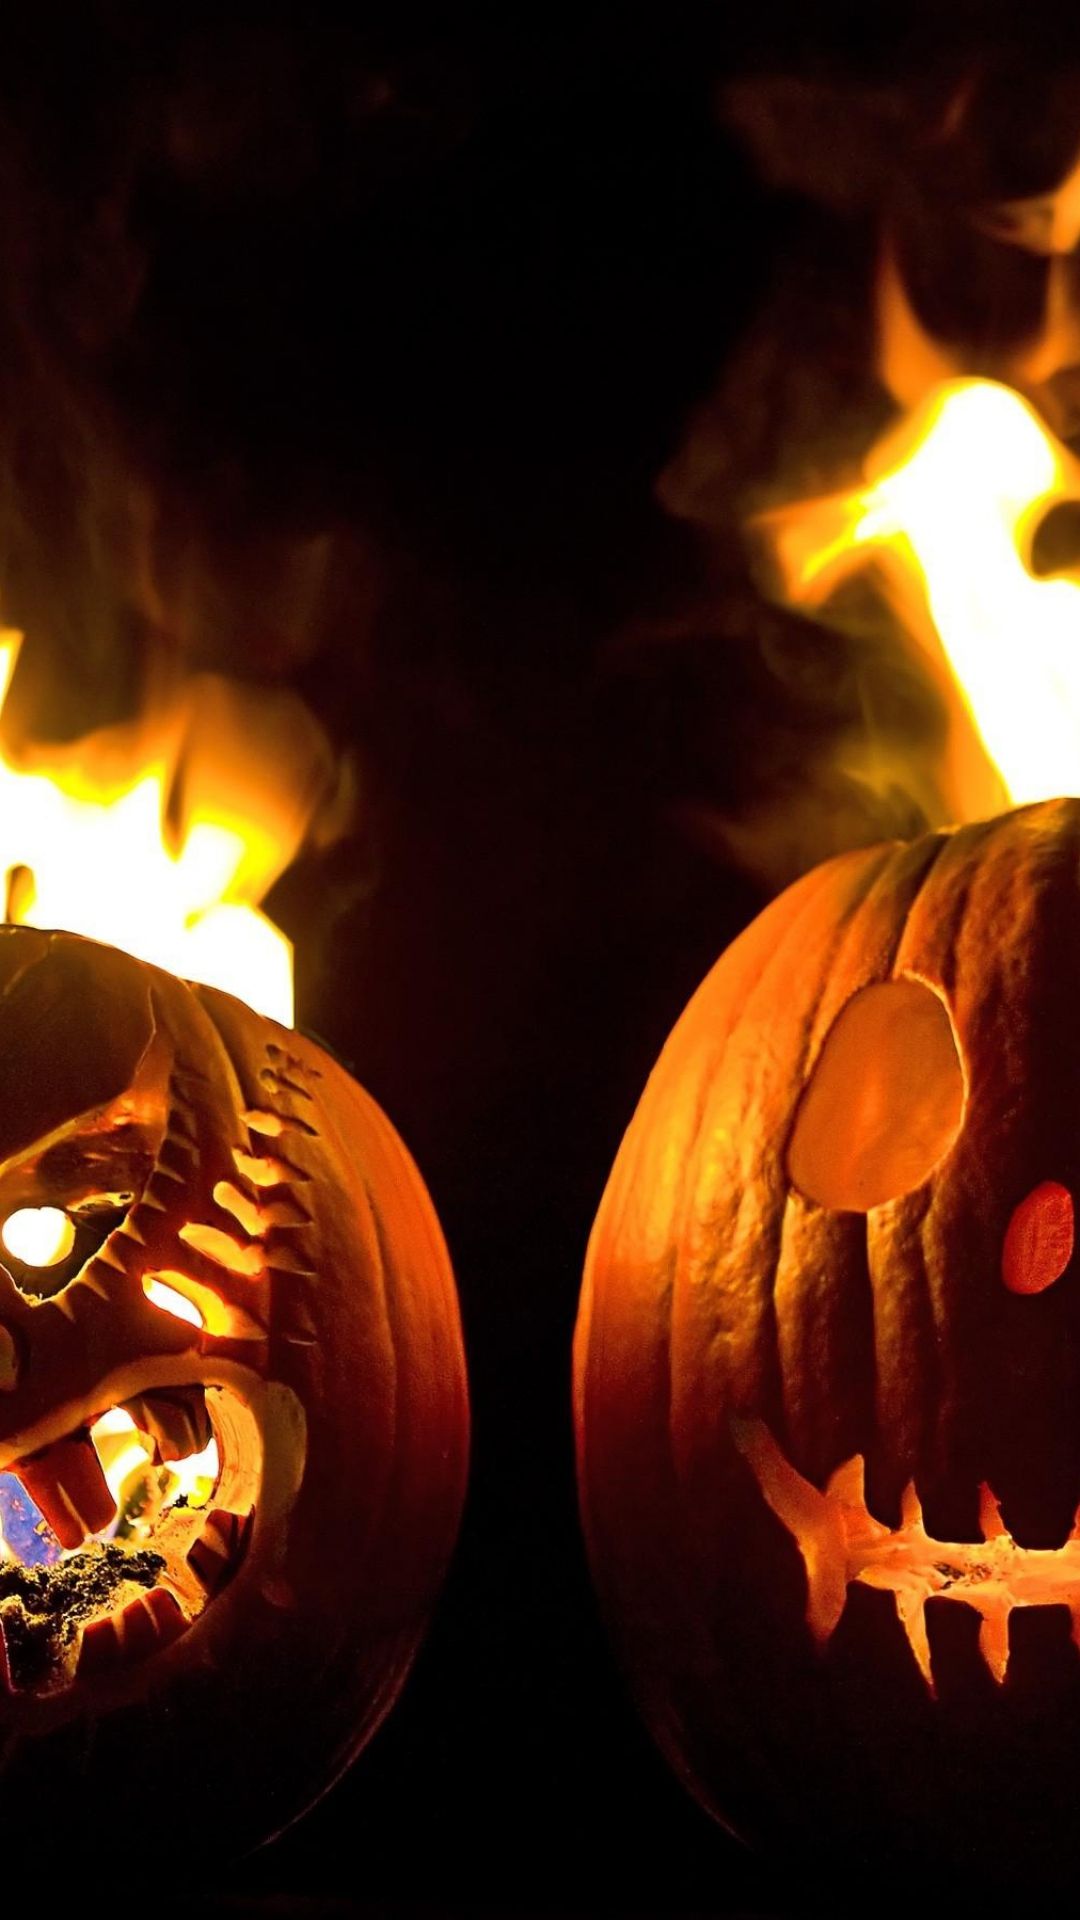 Two Halloween Pumpkins Fire Android Wallpaper free download